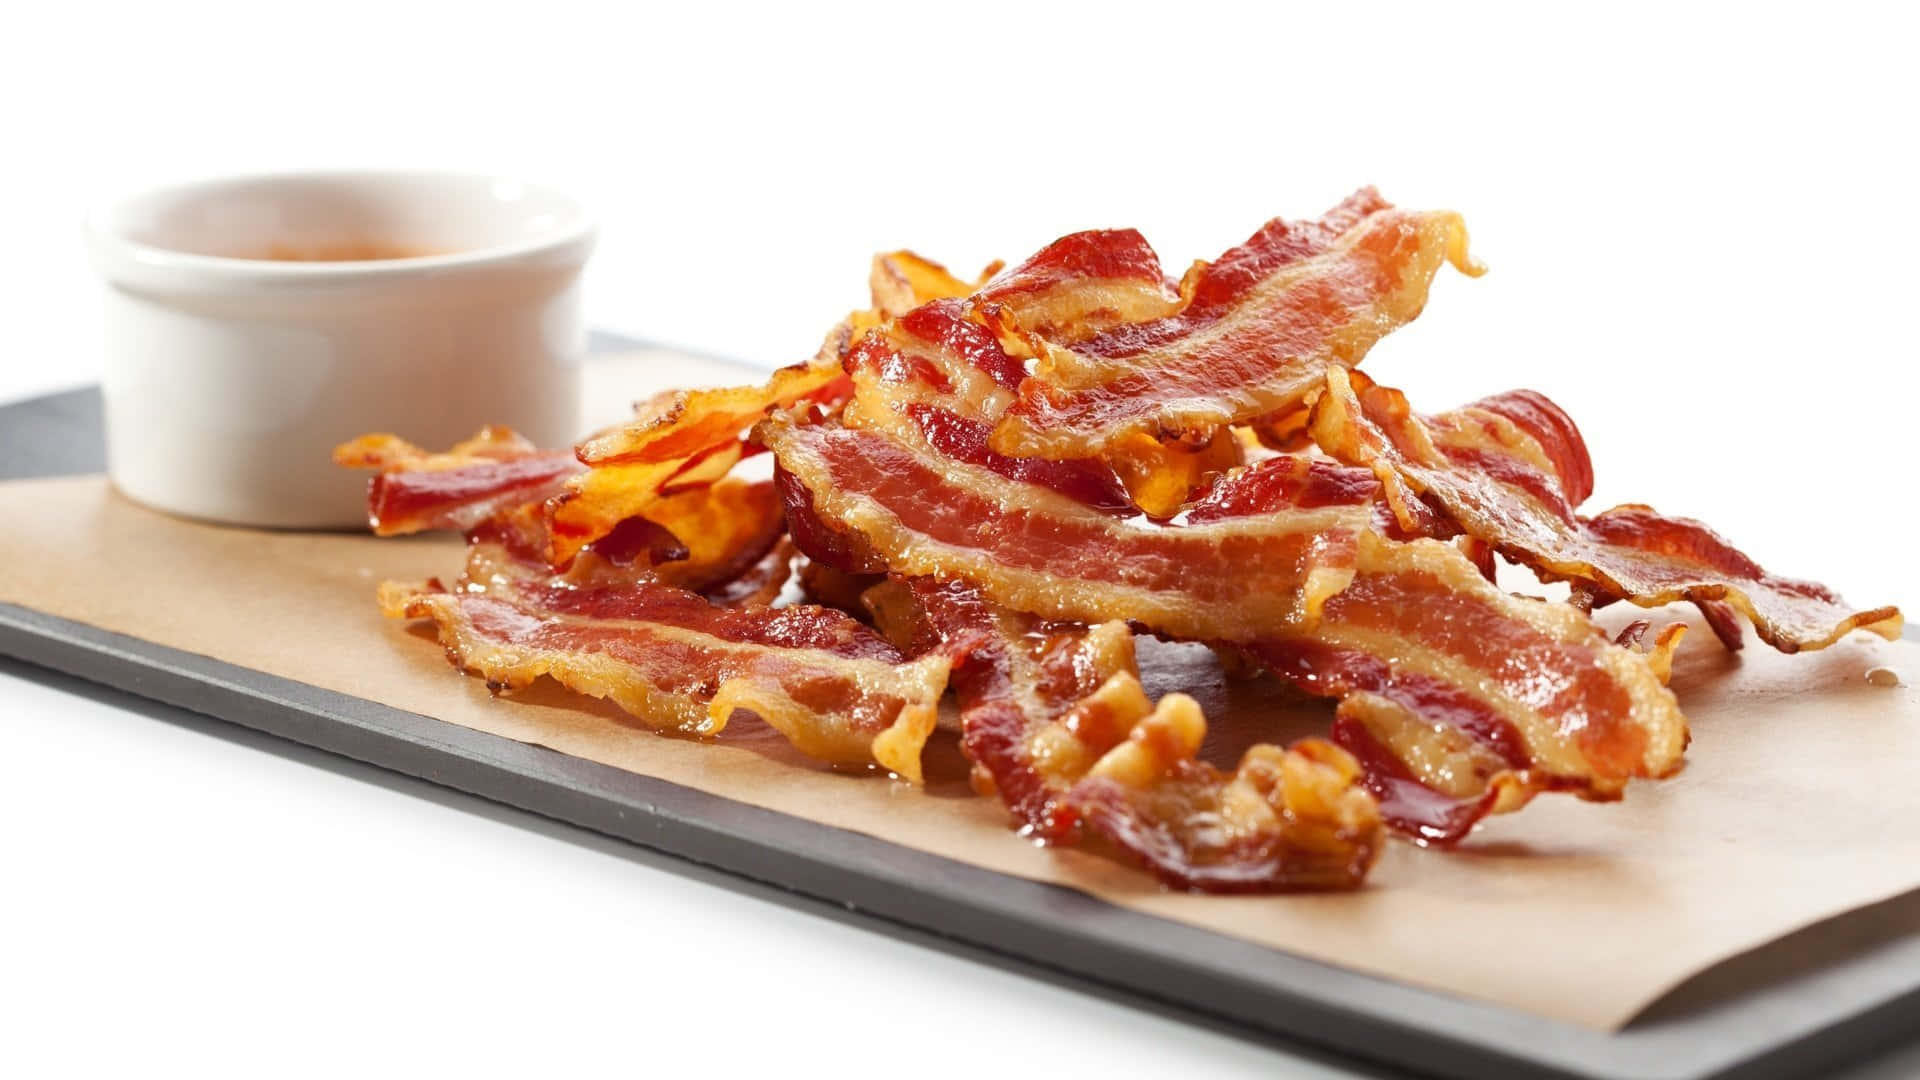 A Delicious Plate of Grilled Bacon